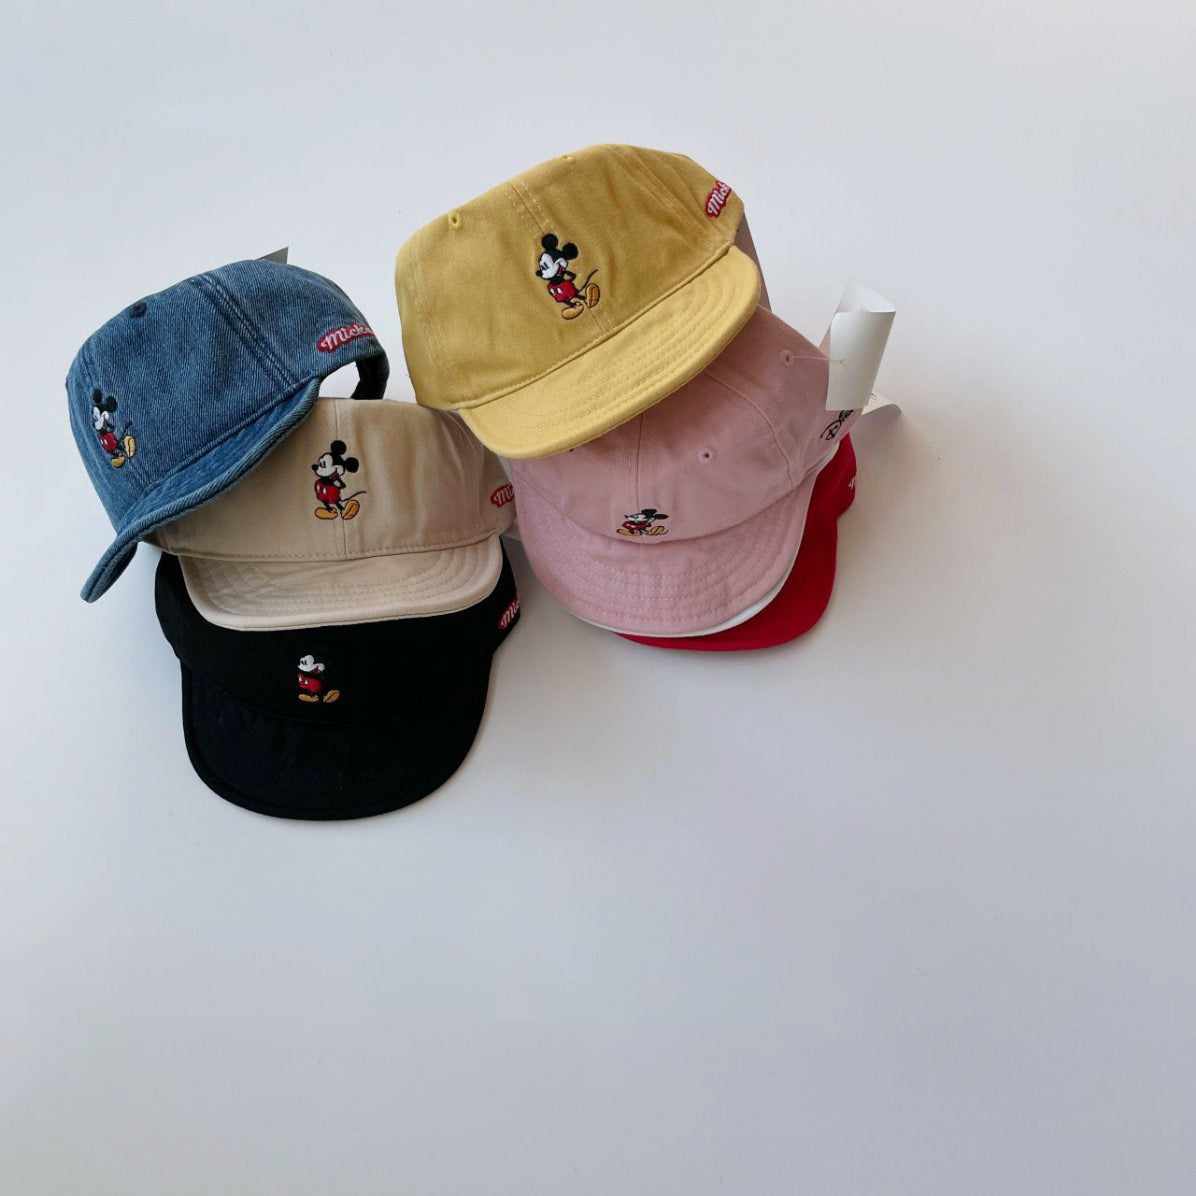 Toddler Mickey Mouse Soft Brim Cap (1-4y) - 4 Colors - AT NOON STORE